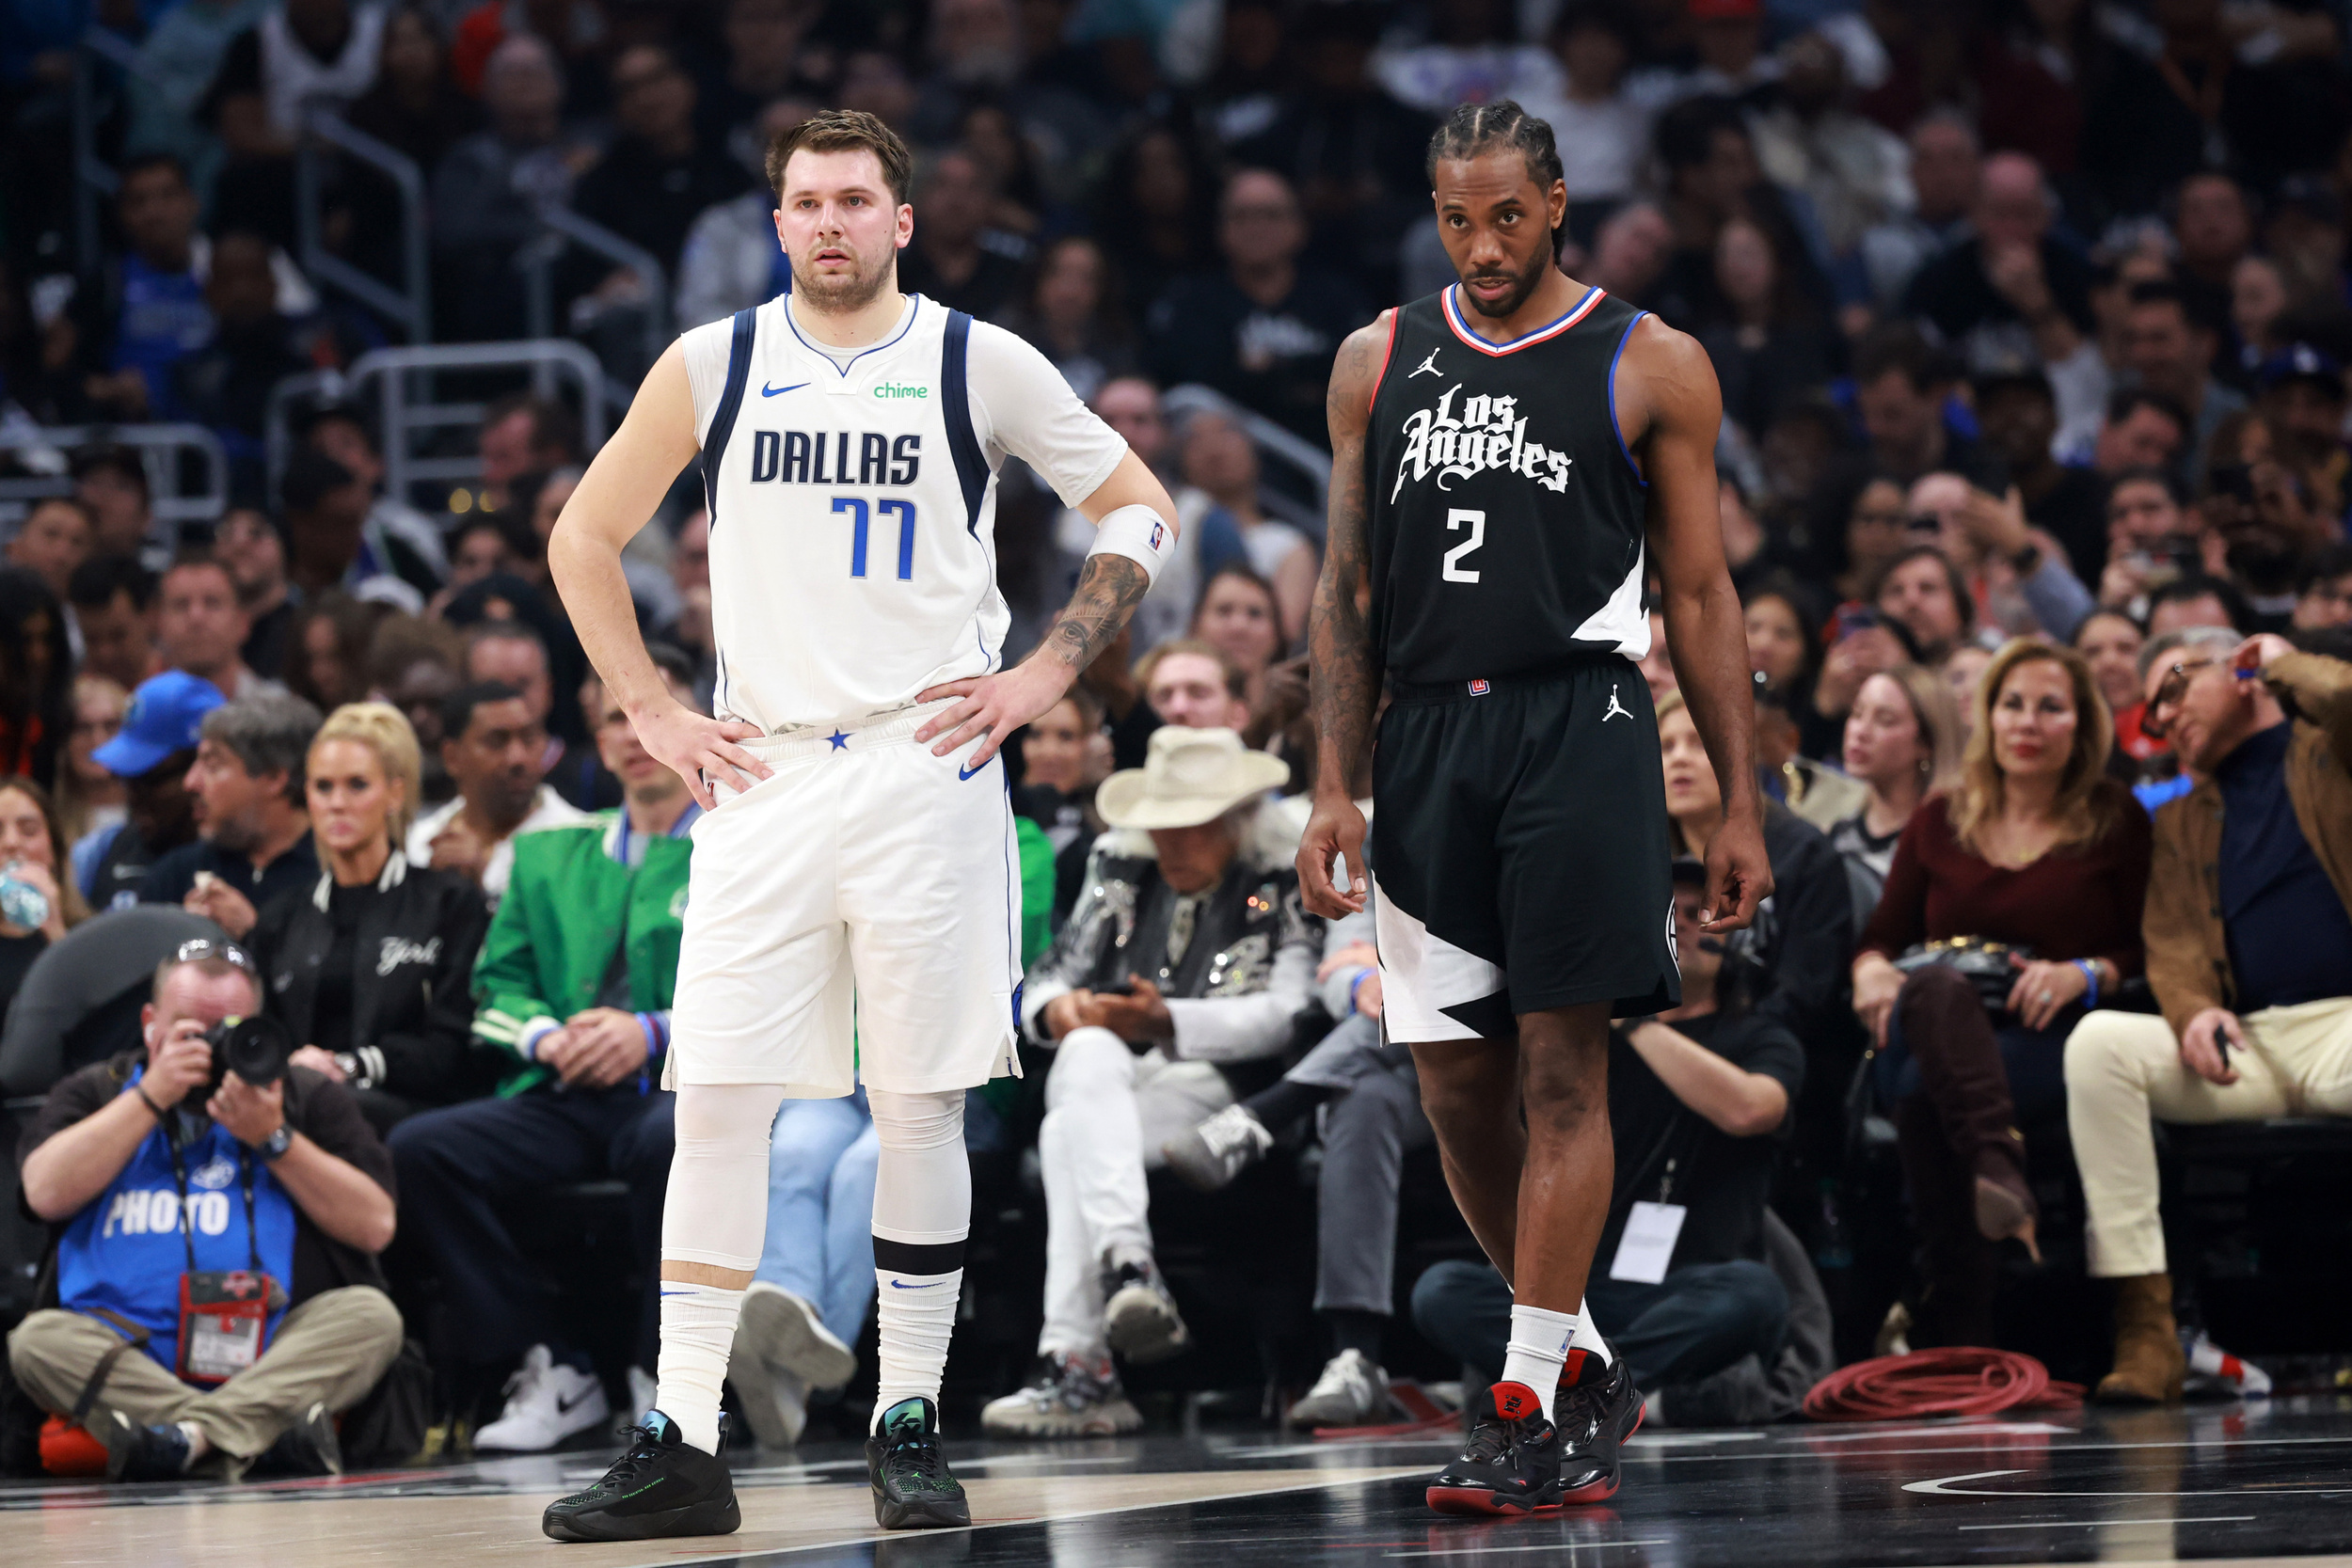 clippers stars don't show up in ugly game 3 loss as mavericks take 2-1 lead